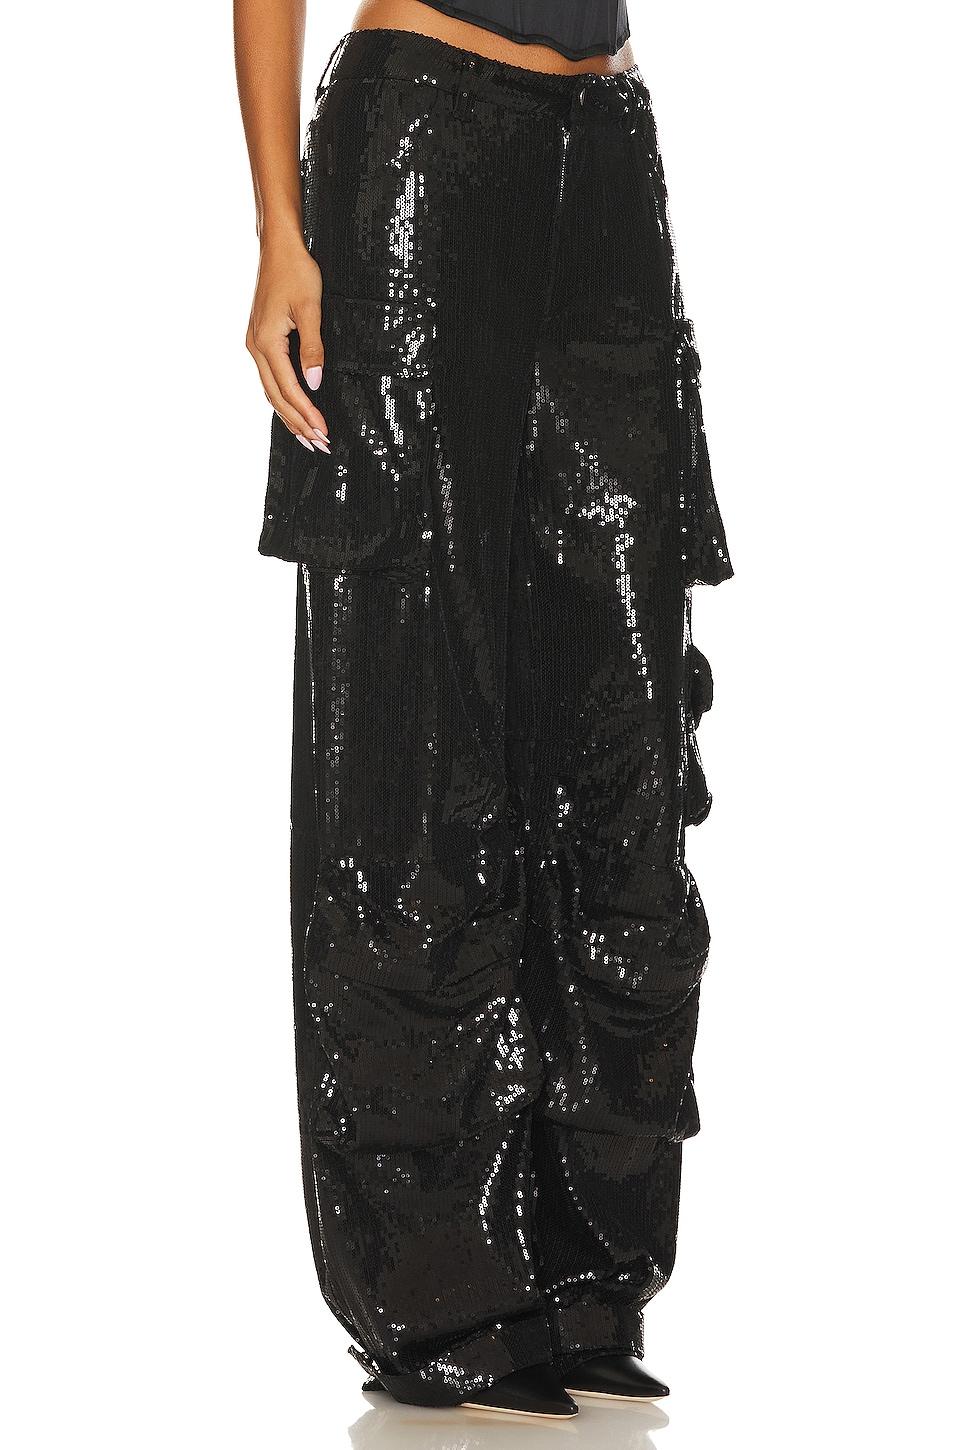 Steve Madden Duo Sequin Pant in Black | Lyst